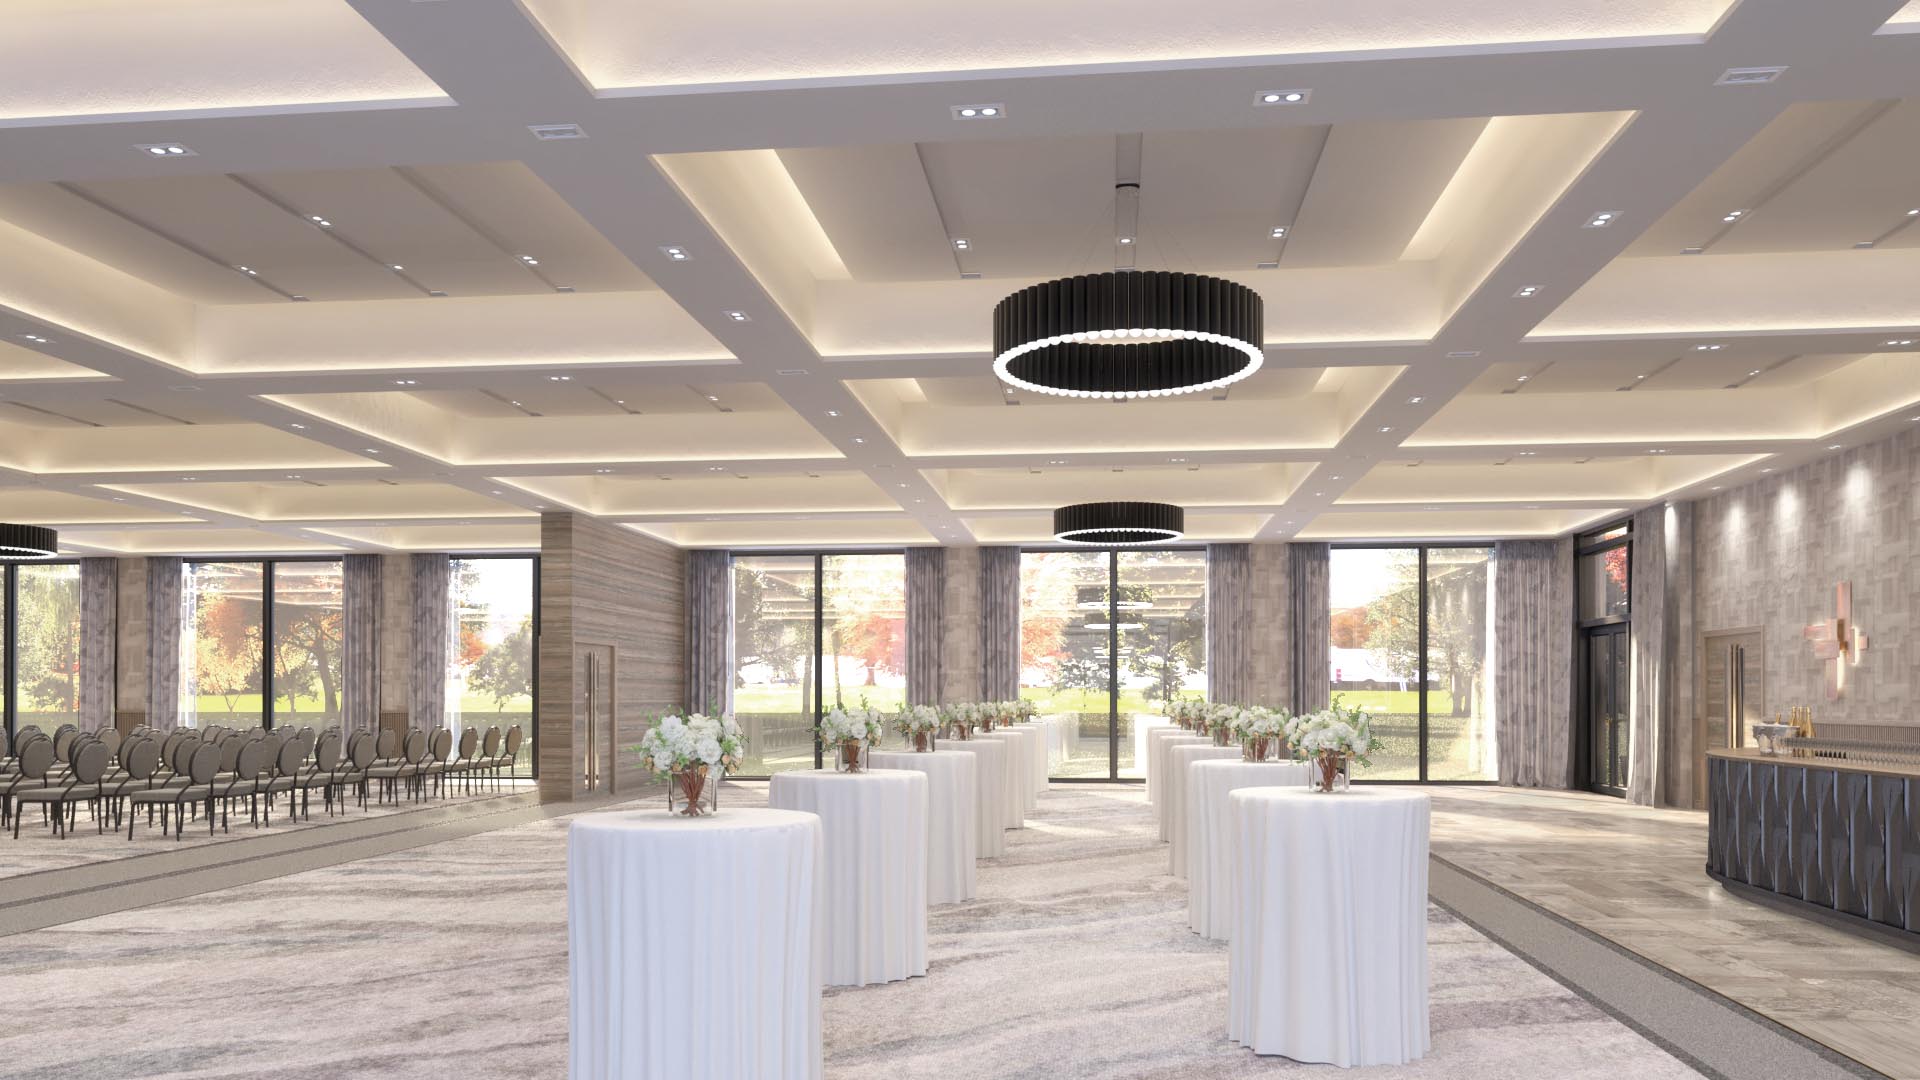 The 7,345 square foot ballroom will have spectacular views of Loch Lomond.